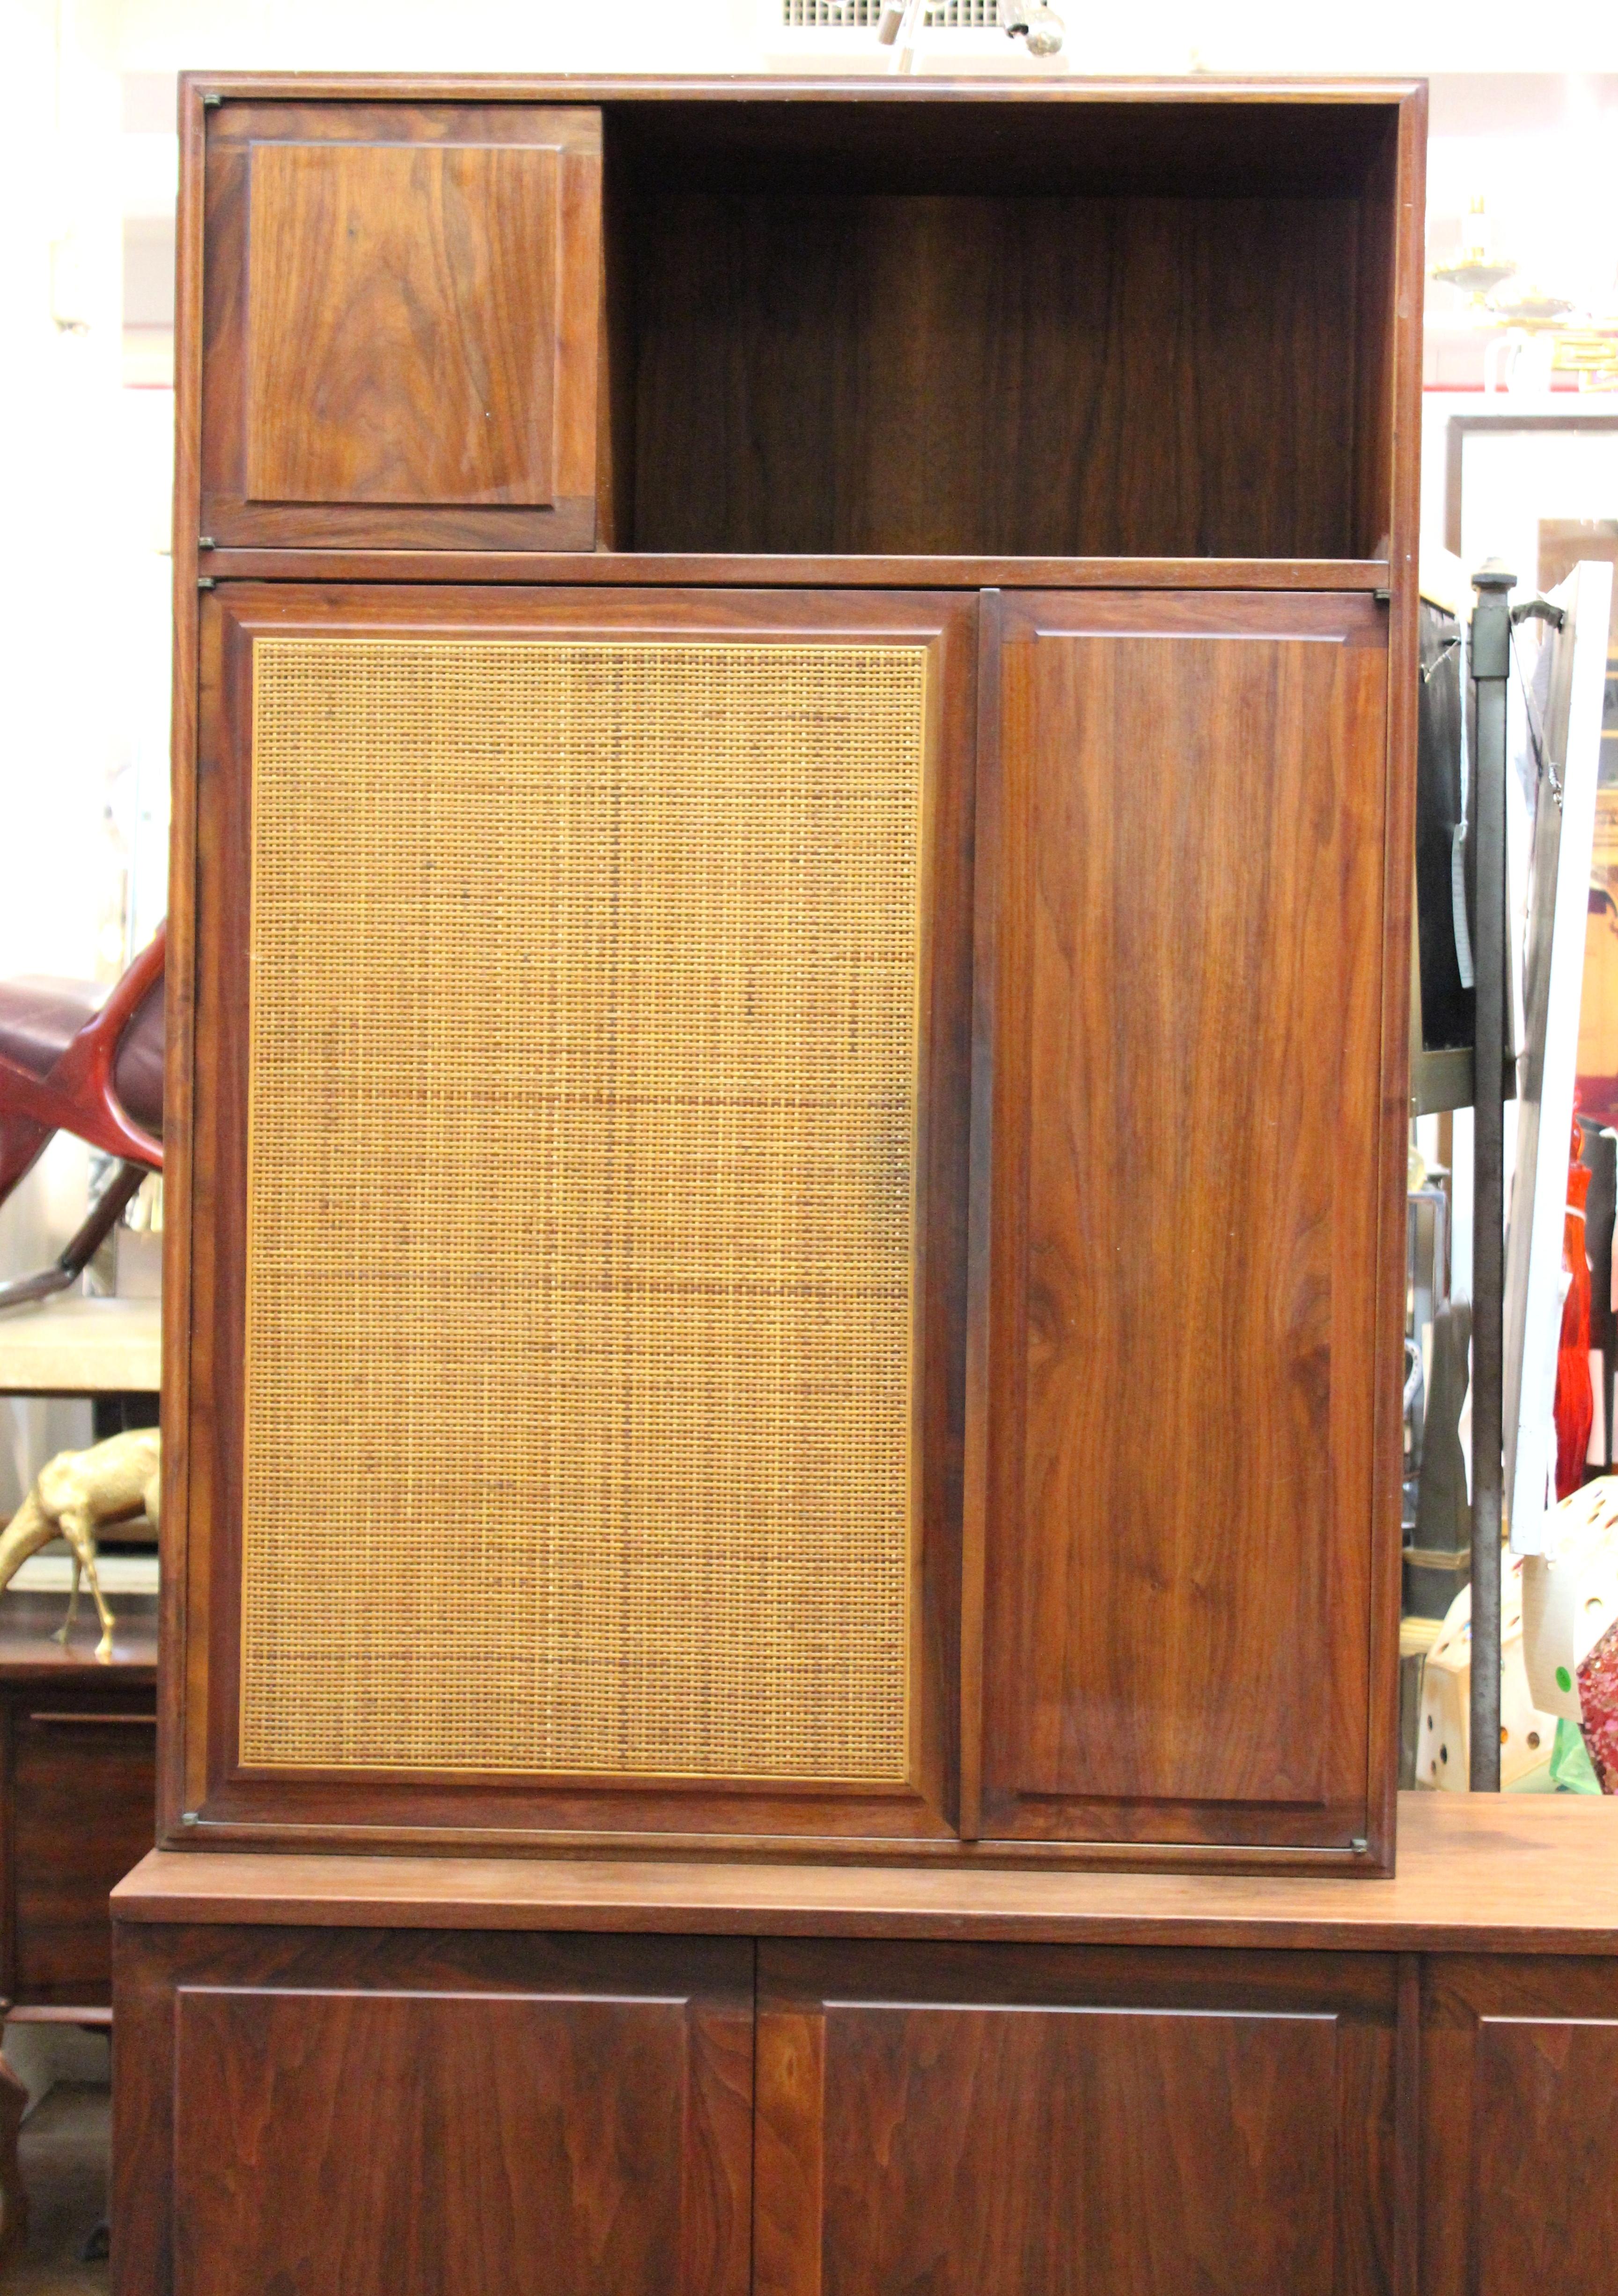 Mid-Century Modern Honduran rosewood book-matched cabinet designed by Jack Cartwright for Founders Furniture Company in circa 1960. The set includes a longer bottom cabinet and a top cabinet. In great vintage condition with age-appropriate wear.